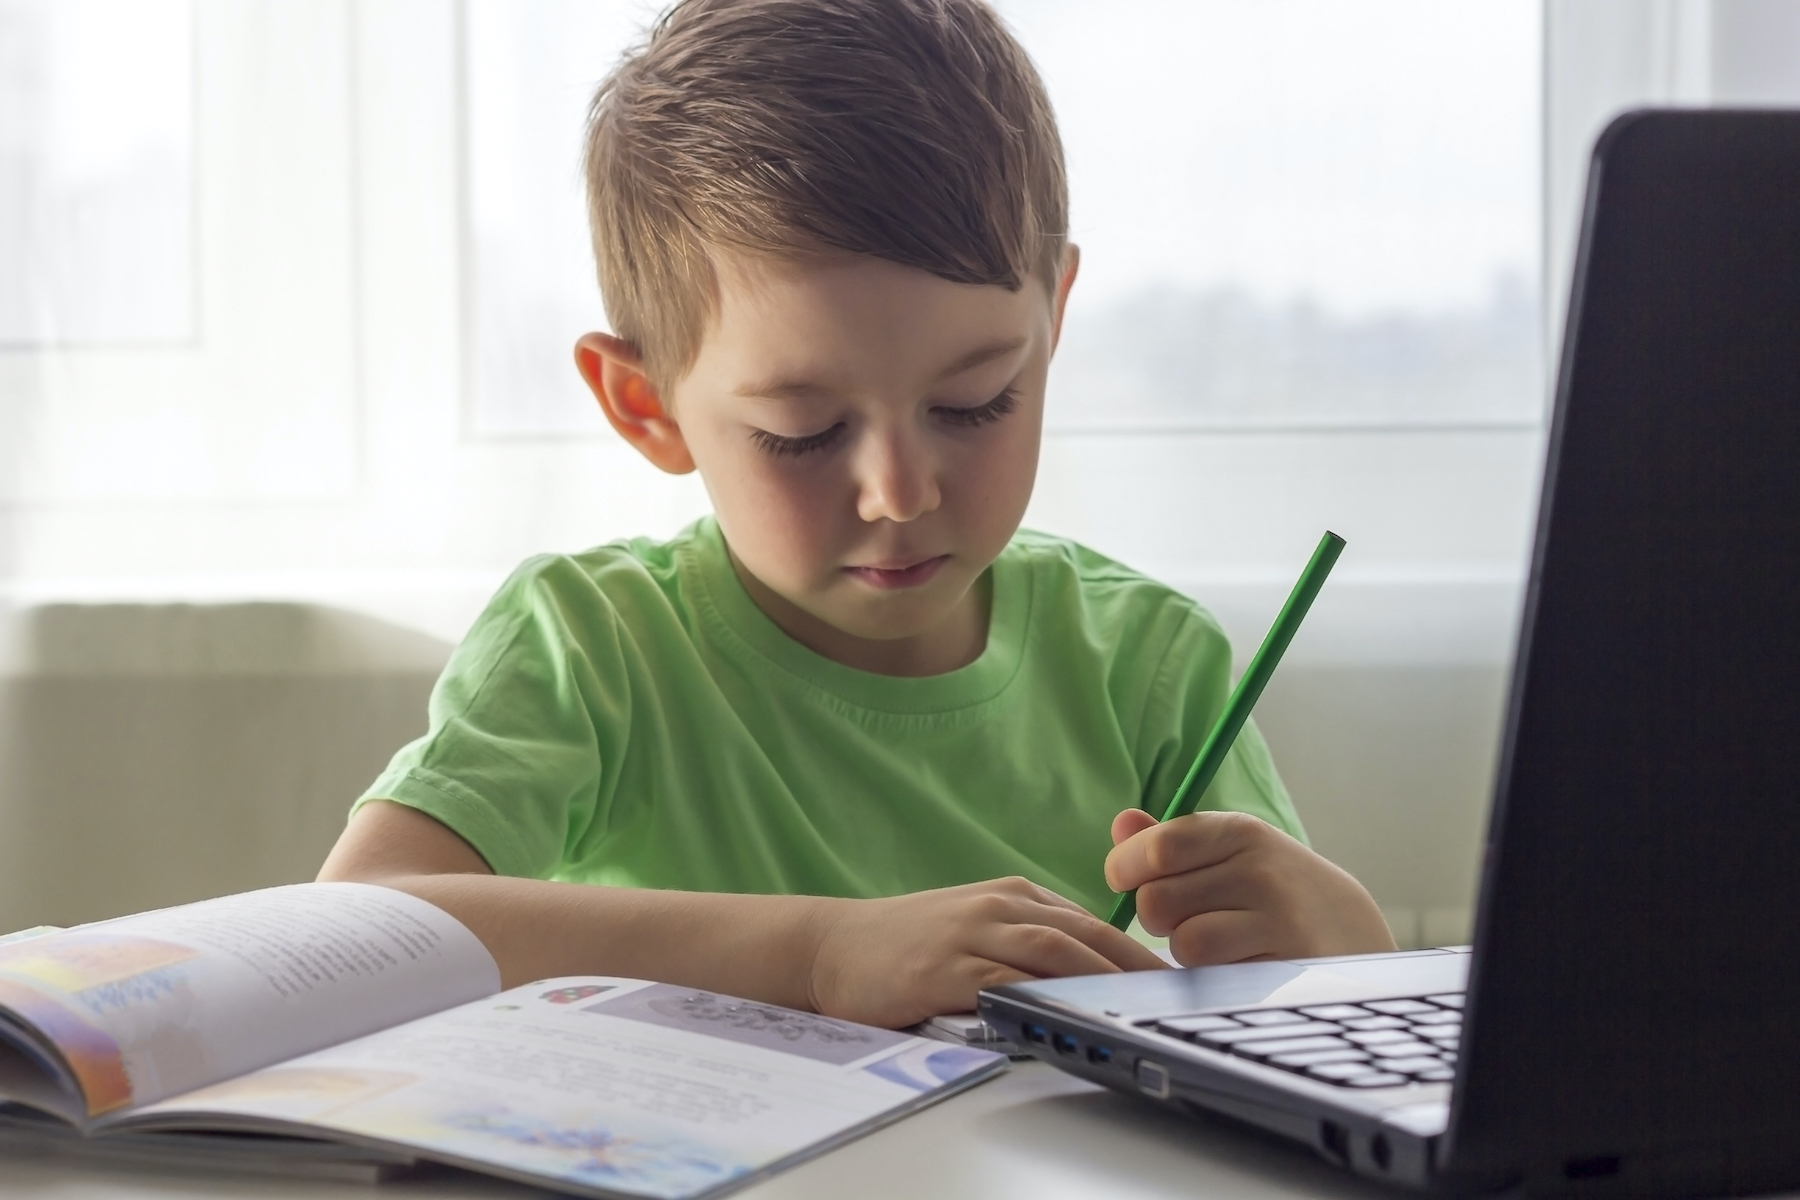 Distance learning, online education. Social distance and self-isolation during quarantine. Preschooler or schoolboy studying at home with notebook and doing homework for development school.